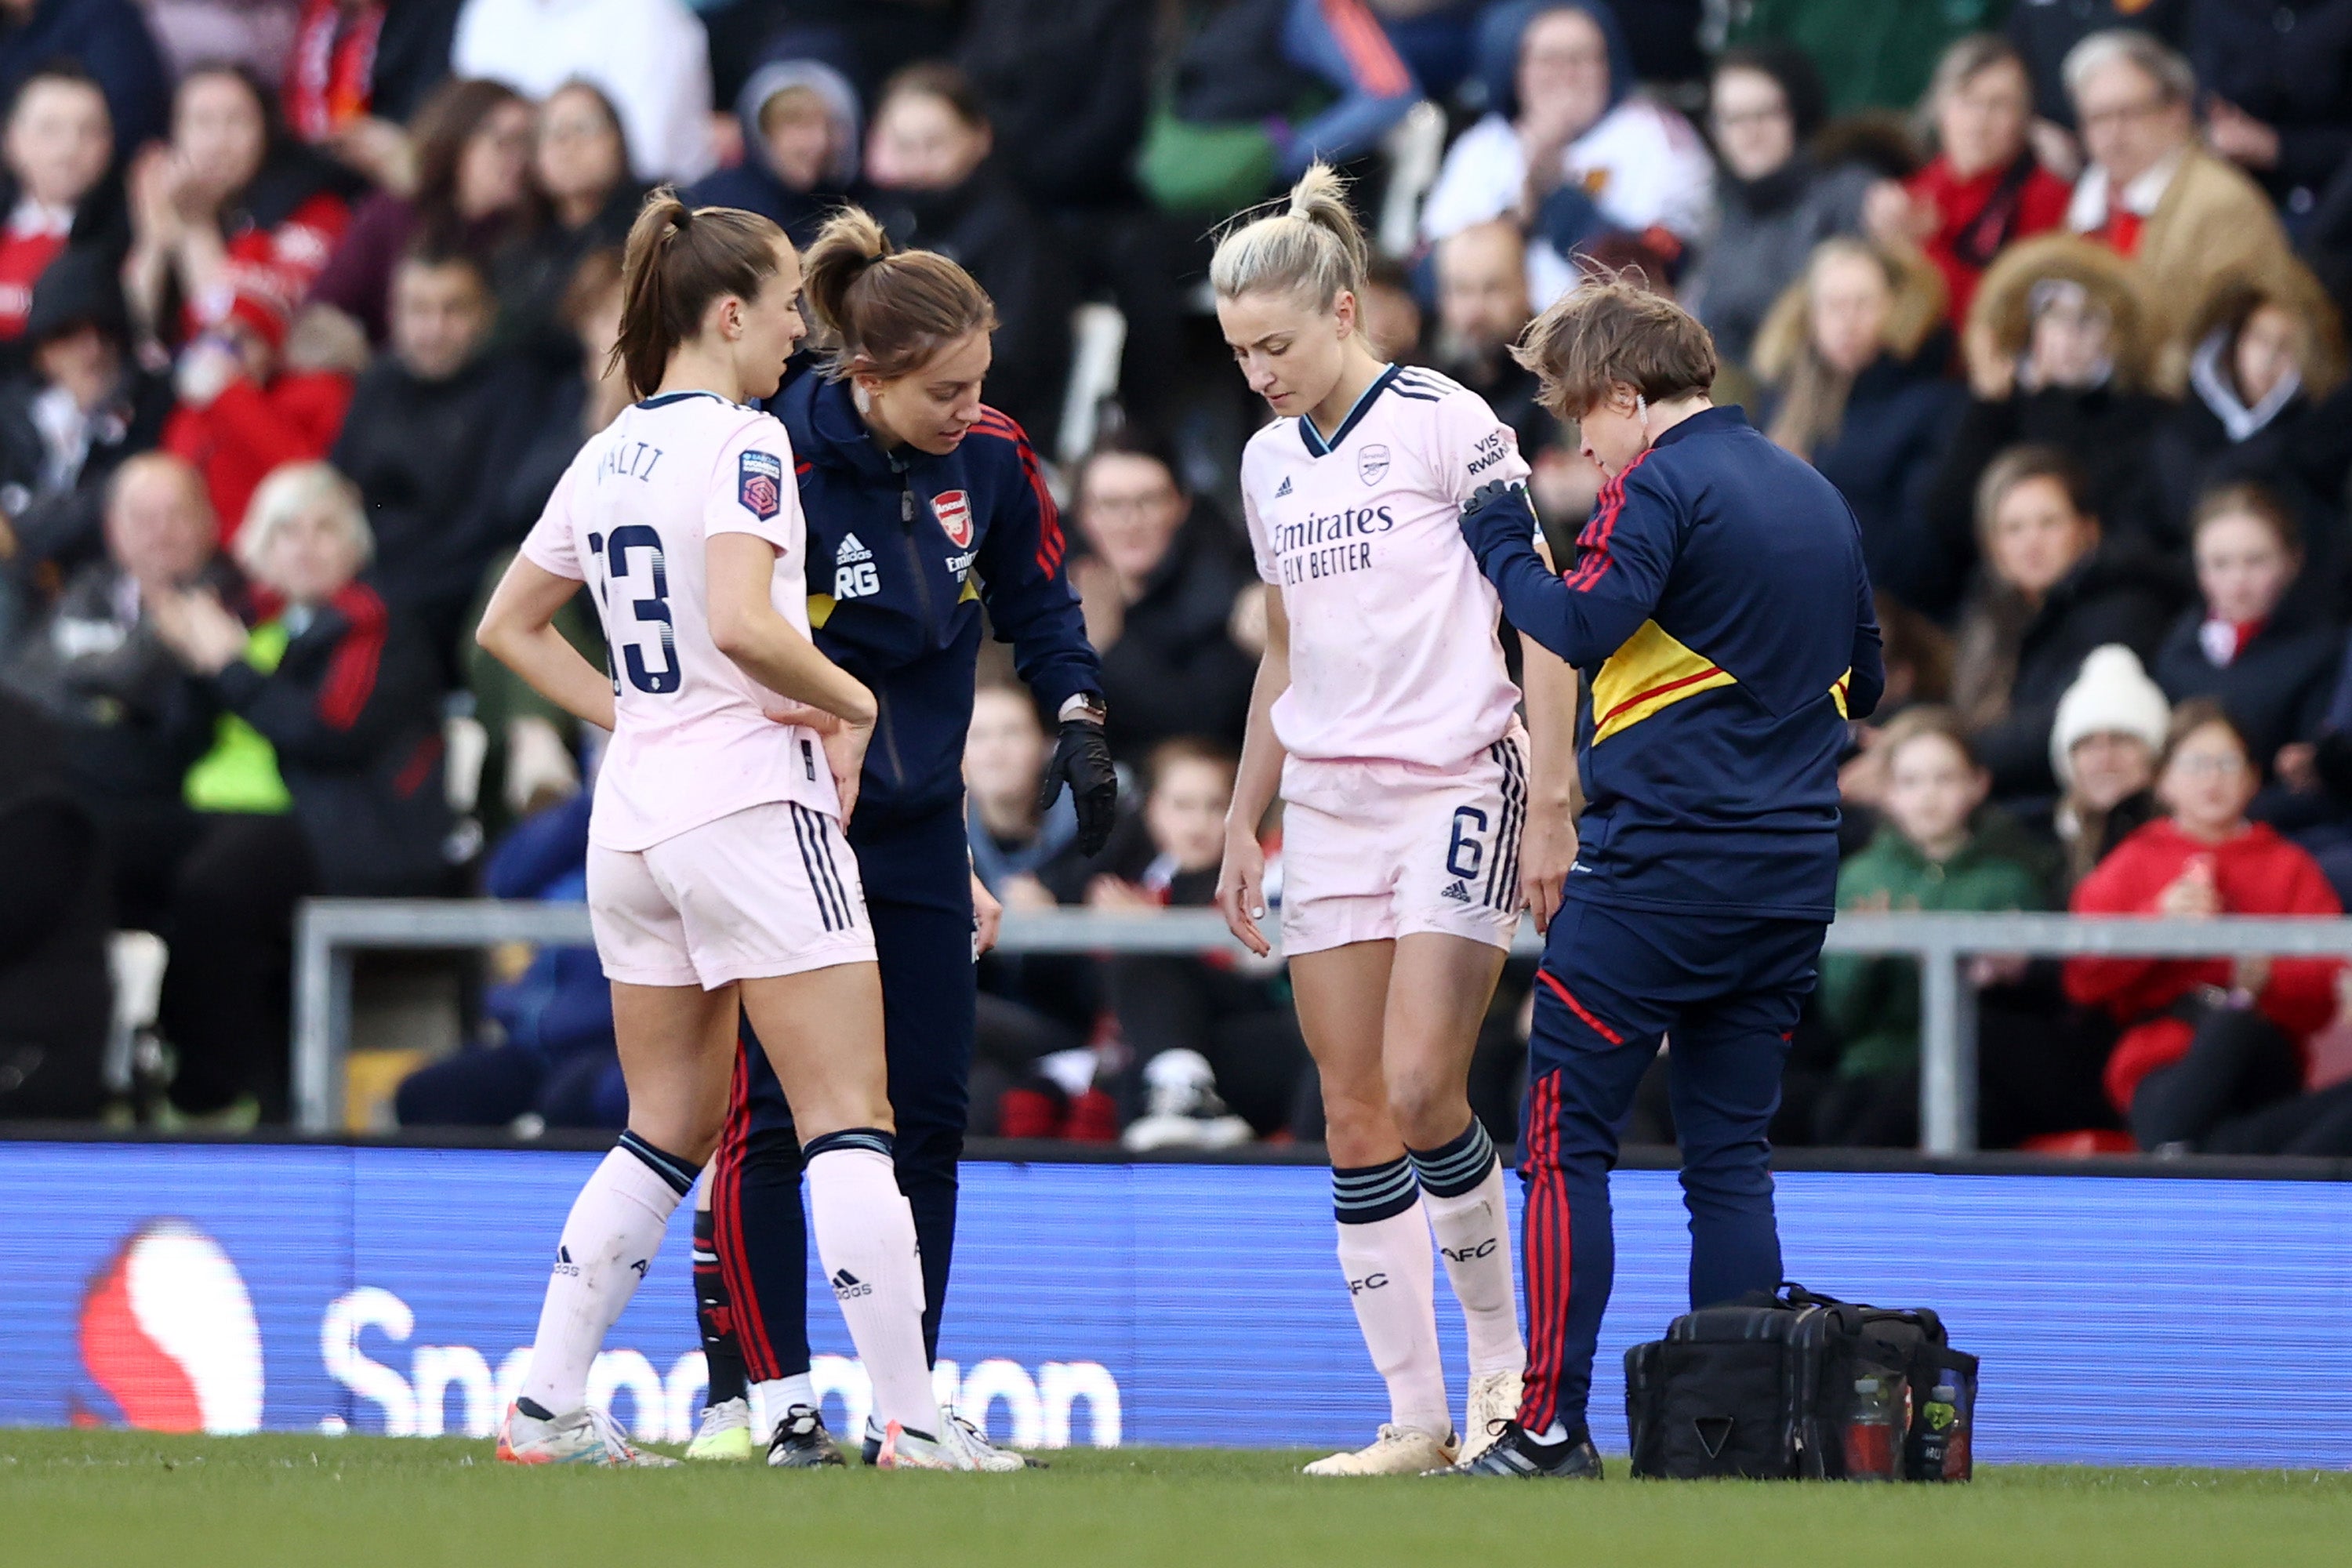 Leah Williamson suffered an ACL injury last year which ruled the England captain out of the World Cup